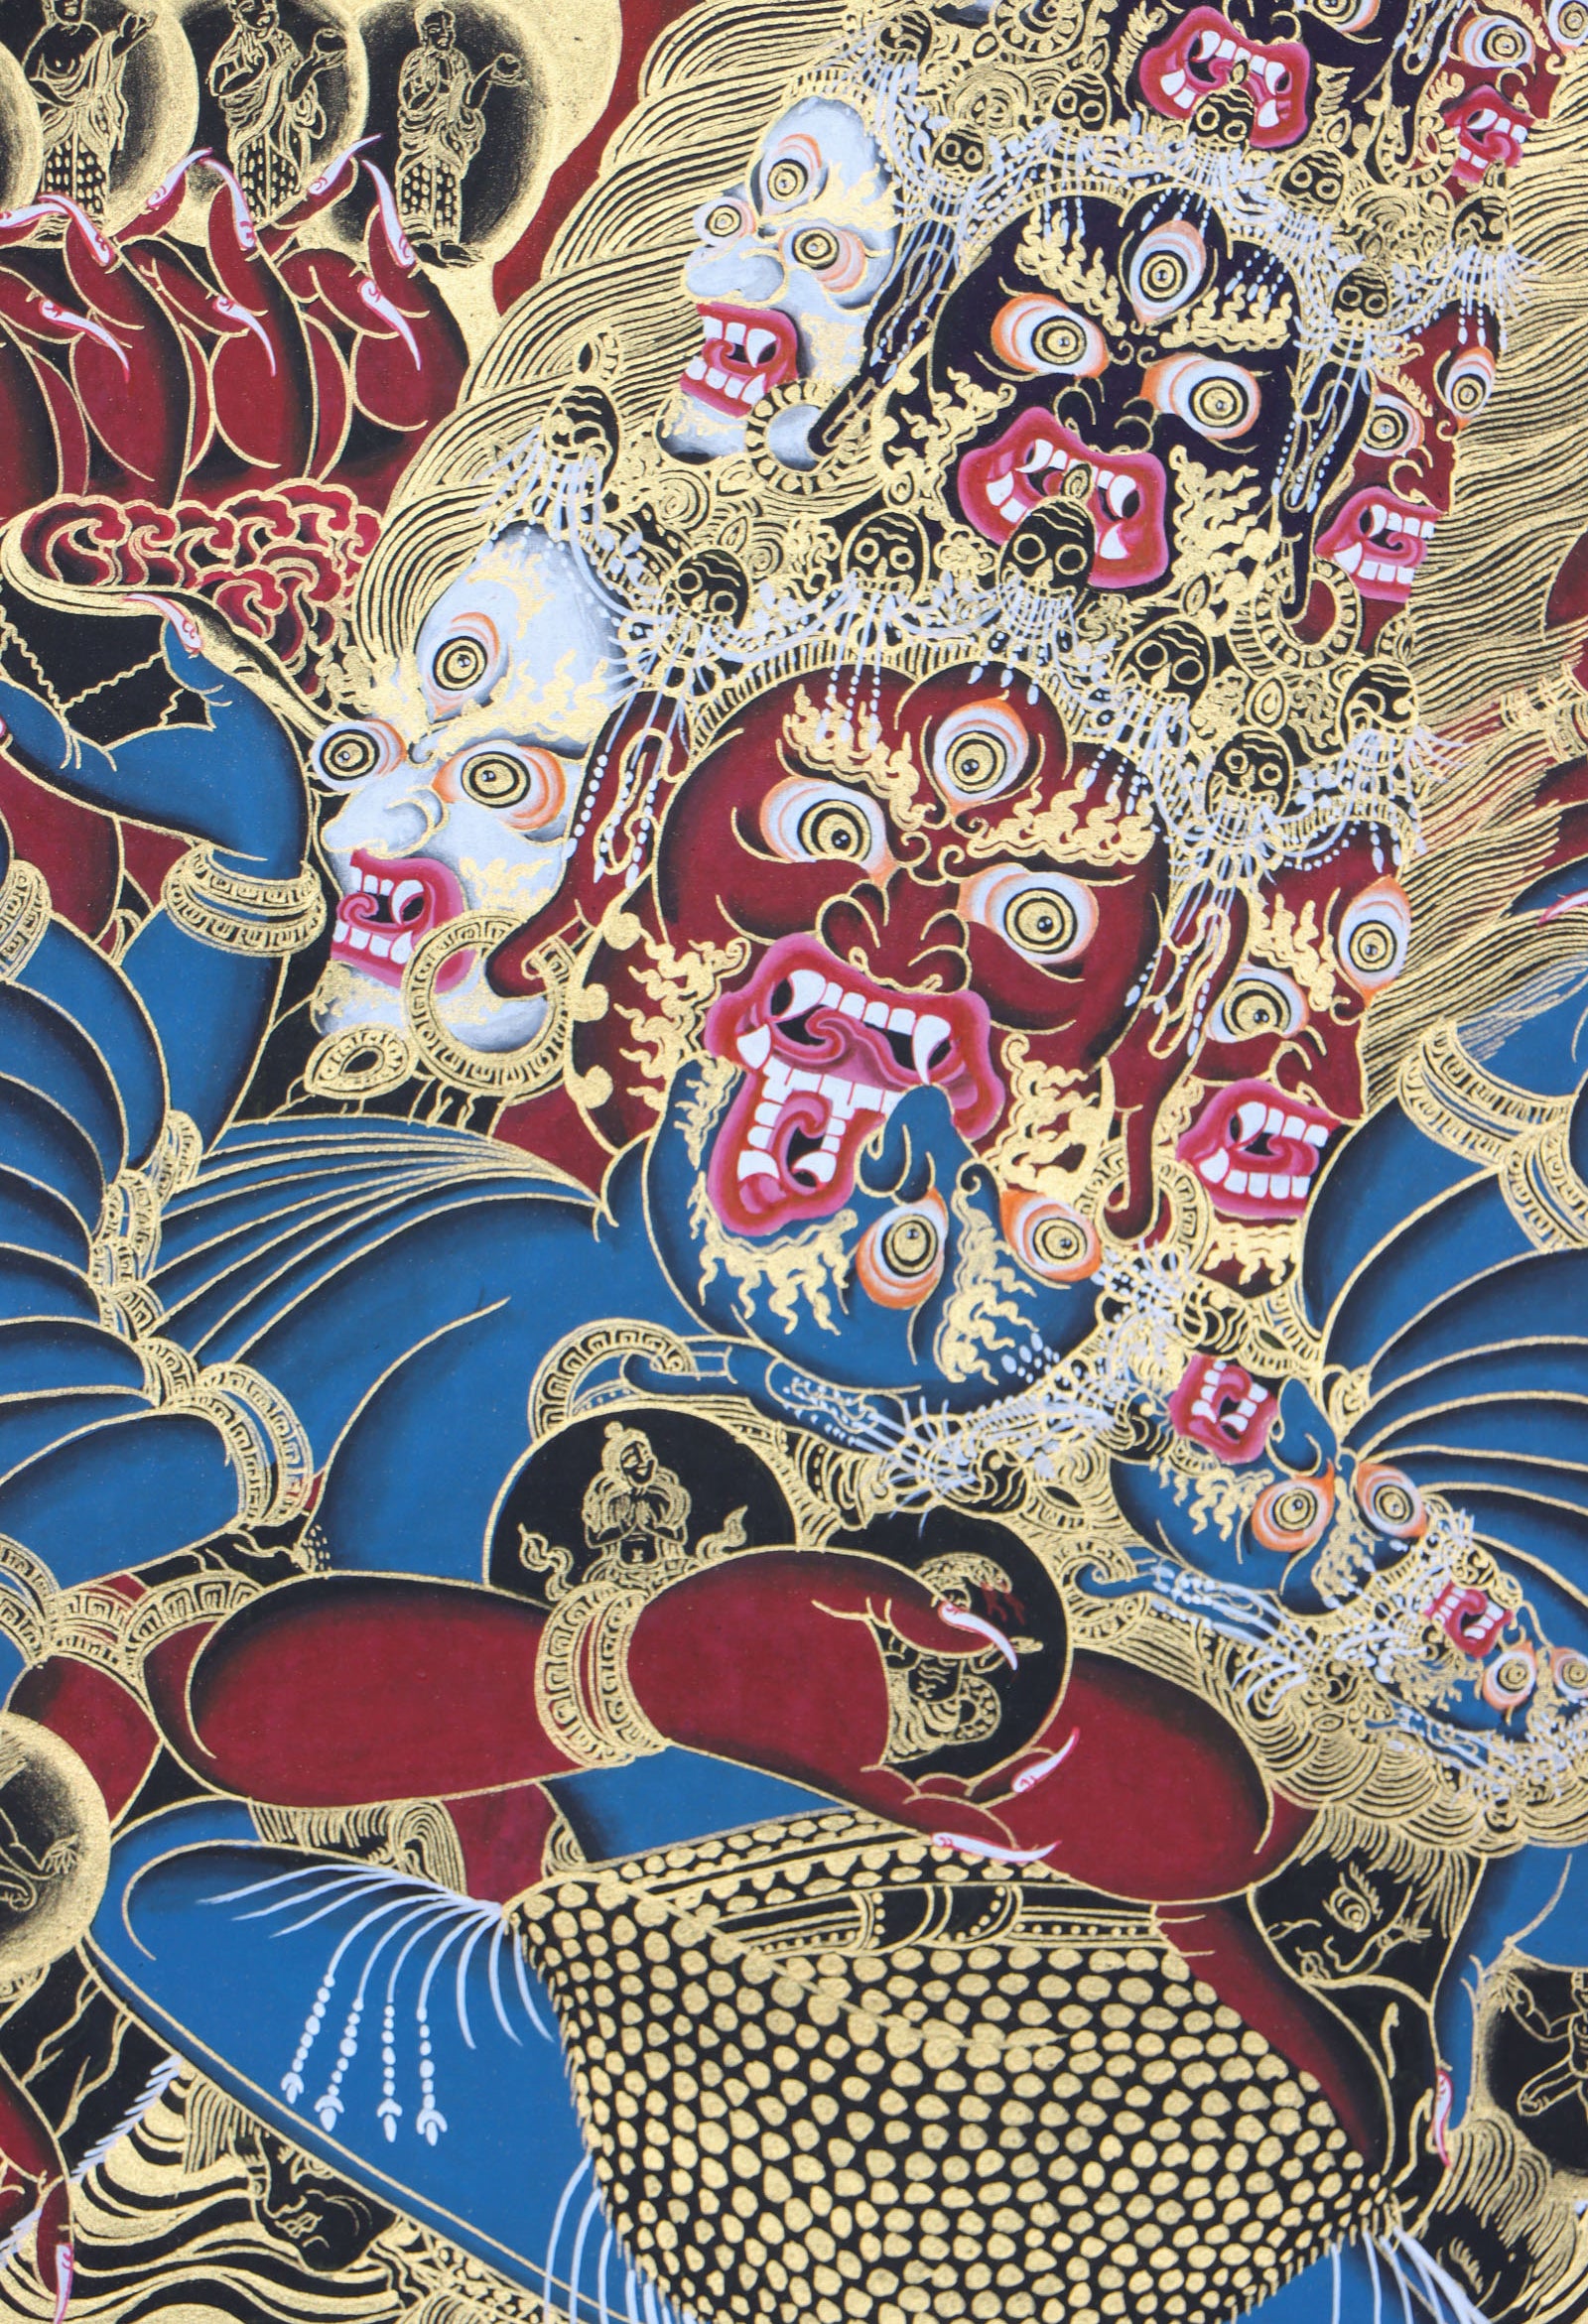 Heruka Thangka Painting aids for meditation and objects of devotion.